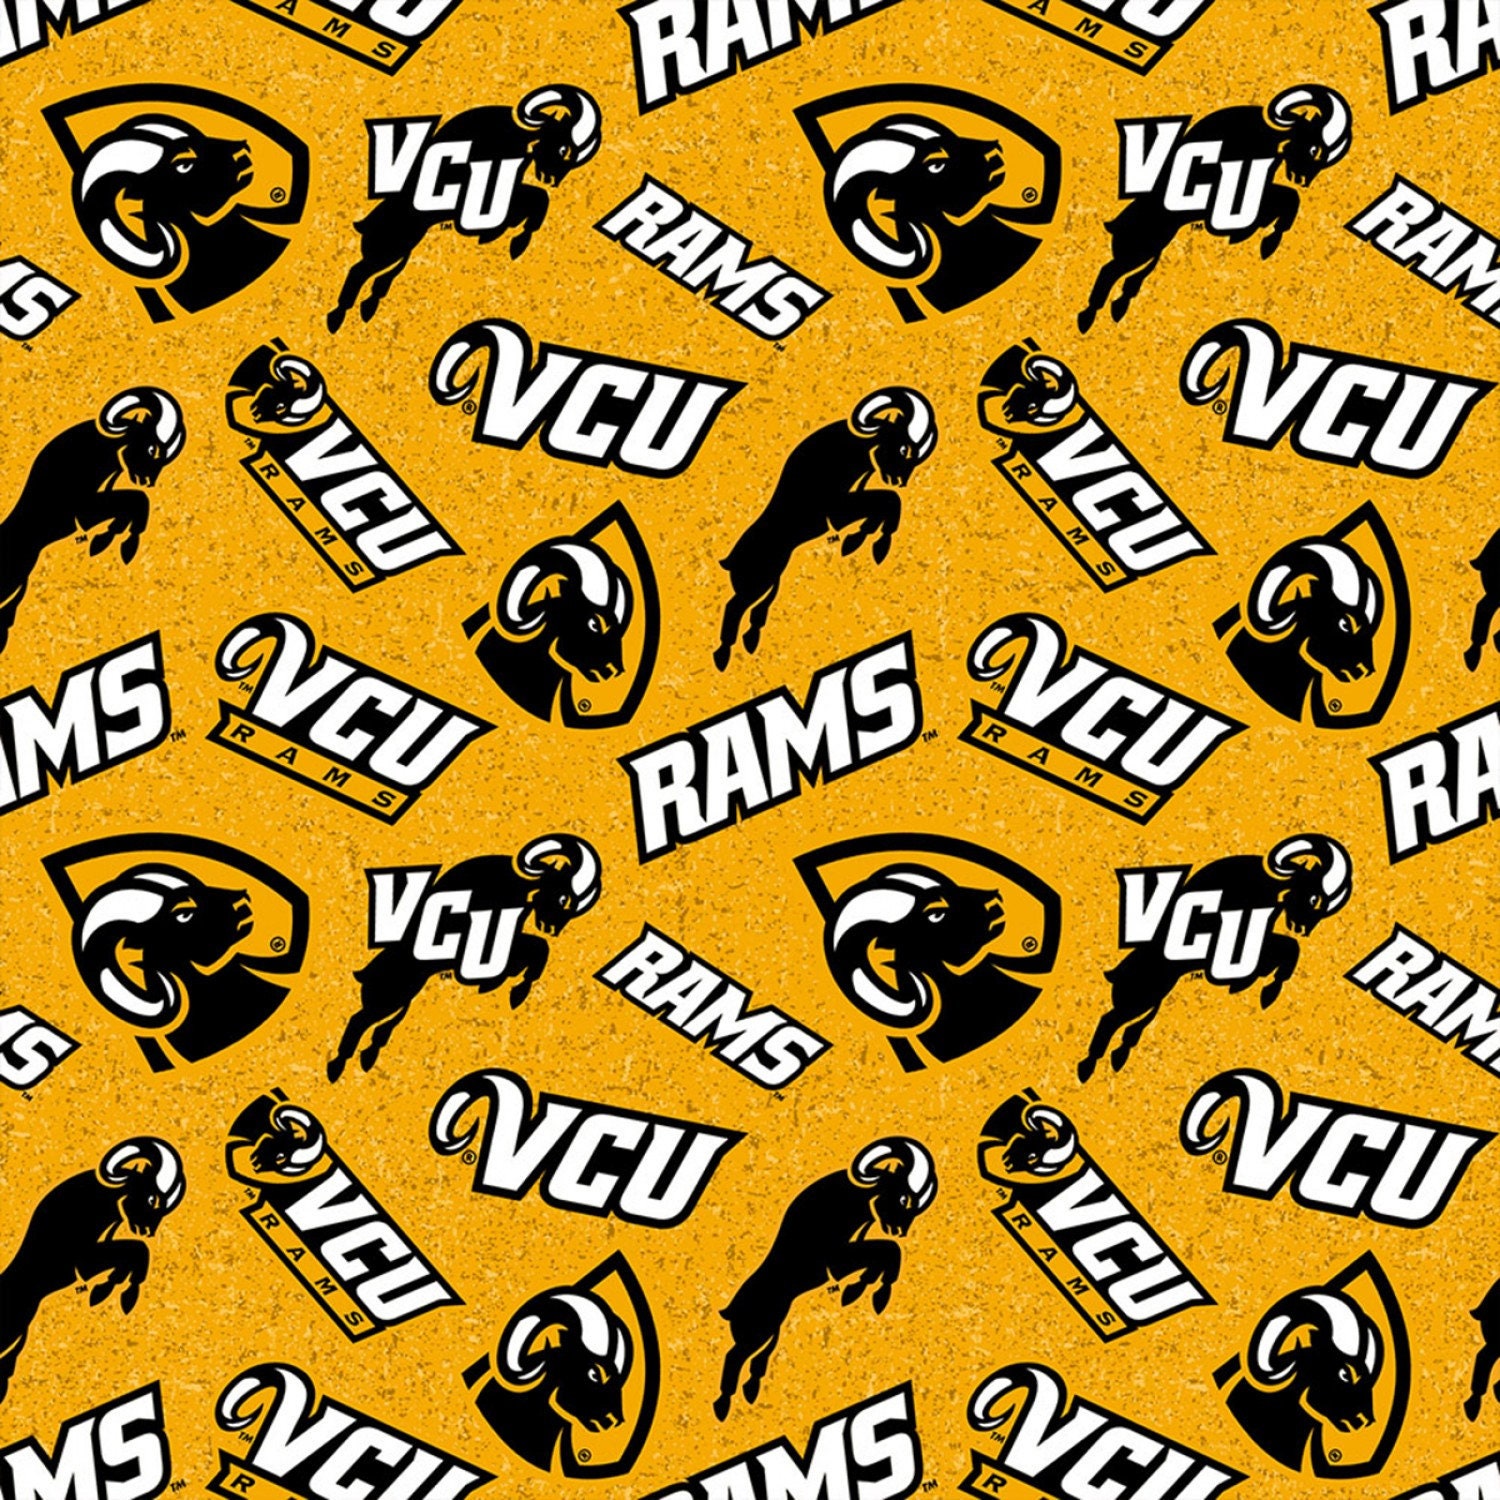 Virginia Commonwealth Rams Ncaa Tone On Design 43 Inches Wide 100% Cotton Fabric Vcu-1178